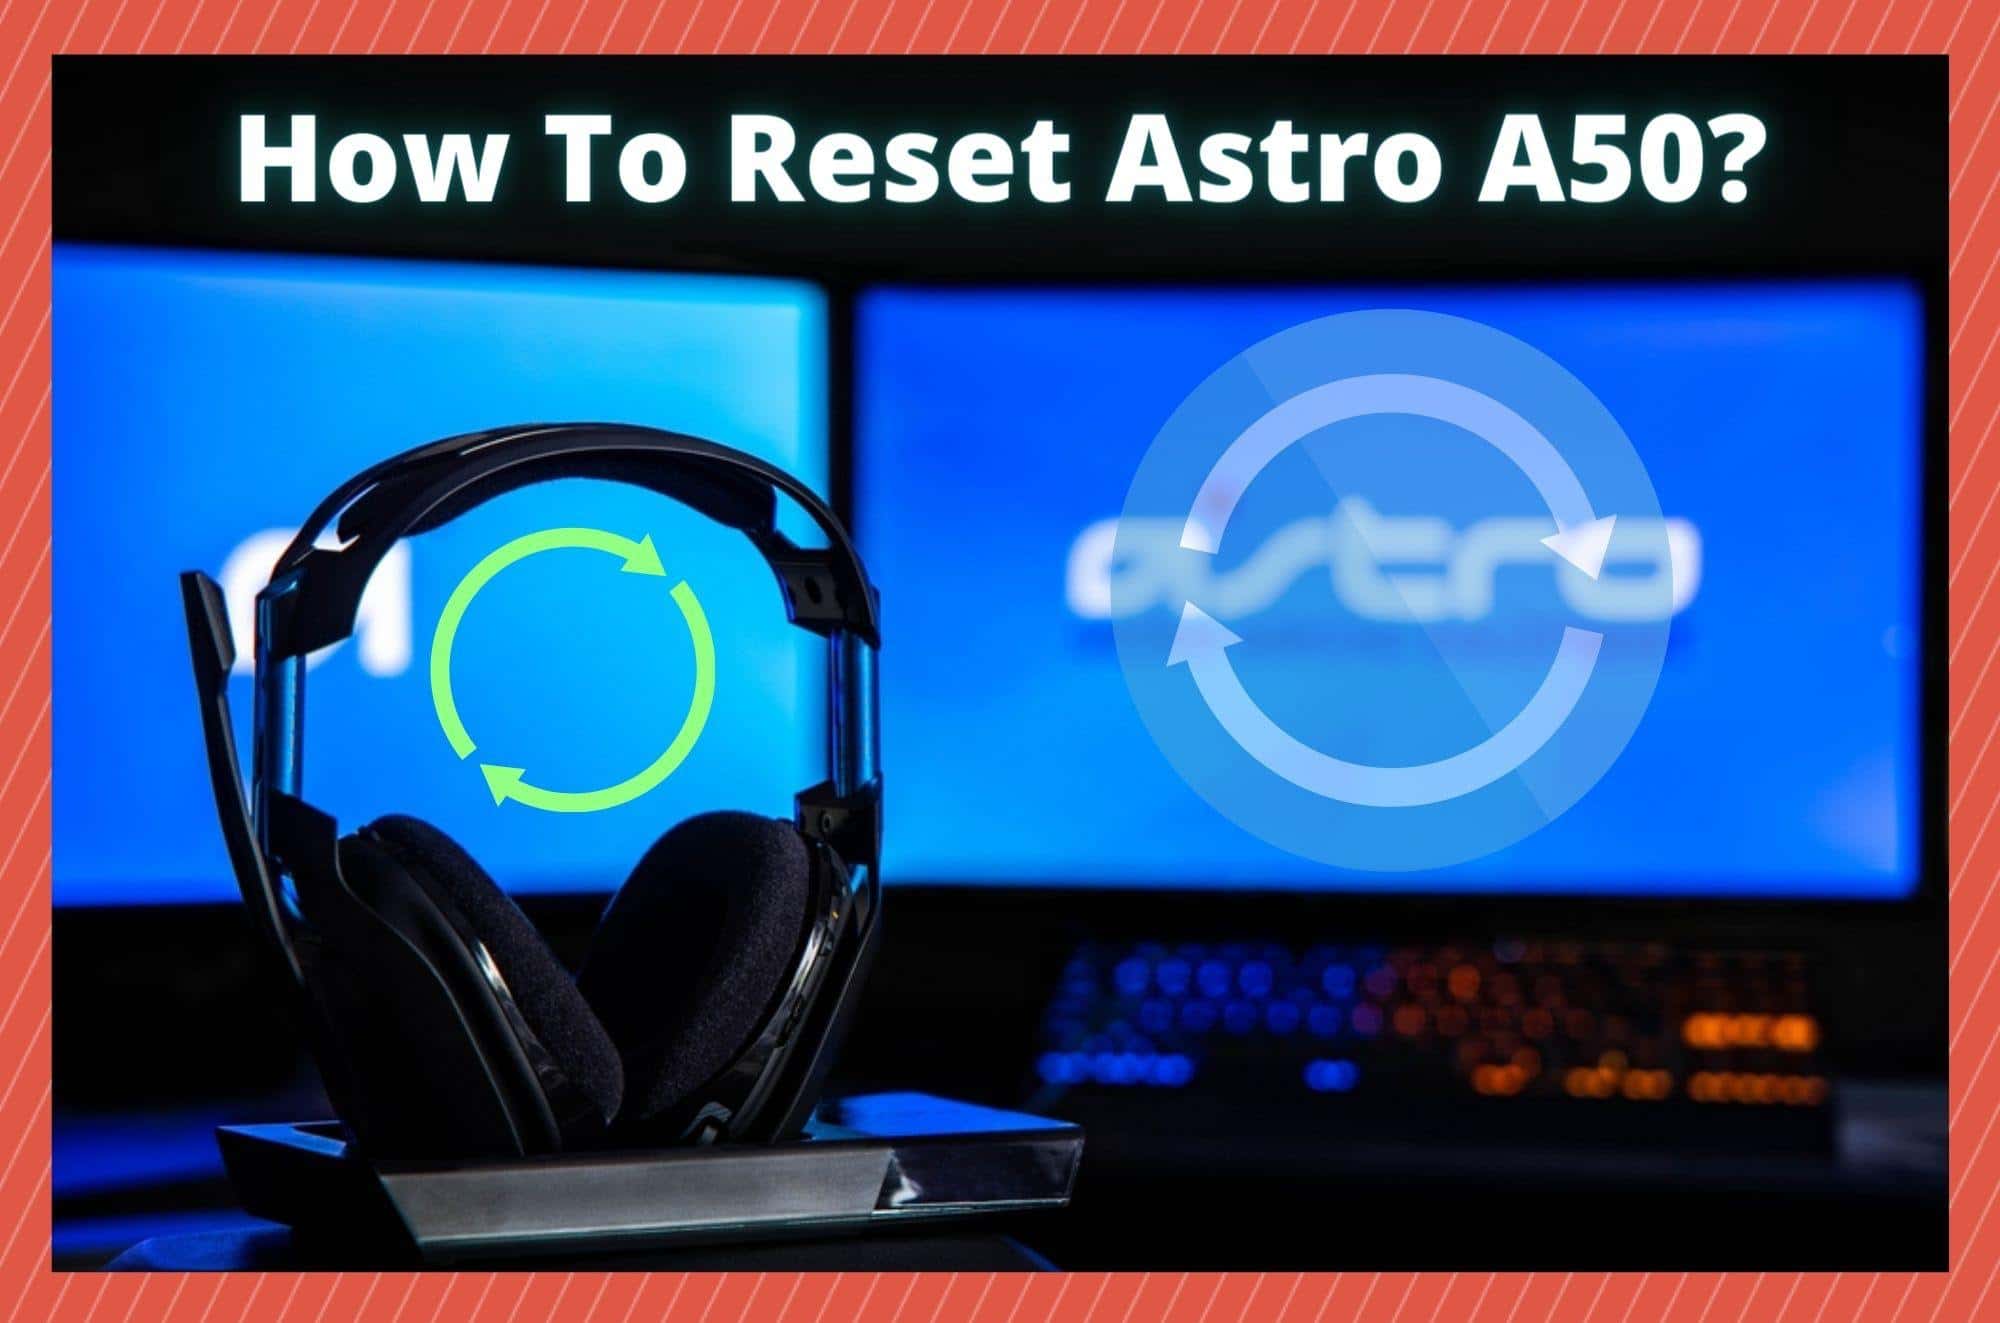 How To Reset Astro A50